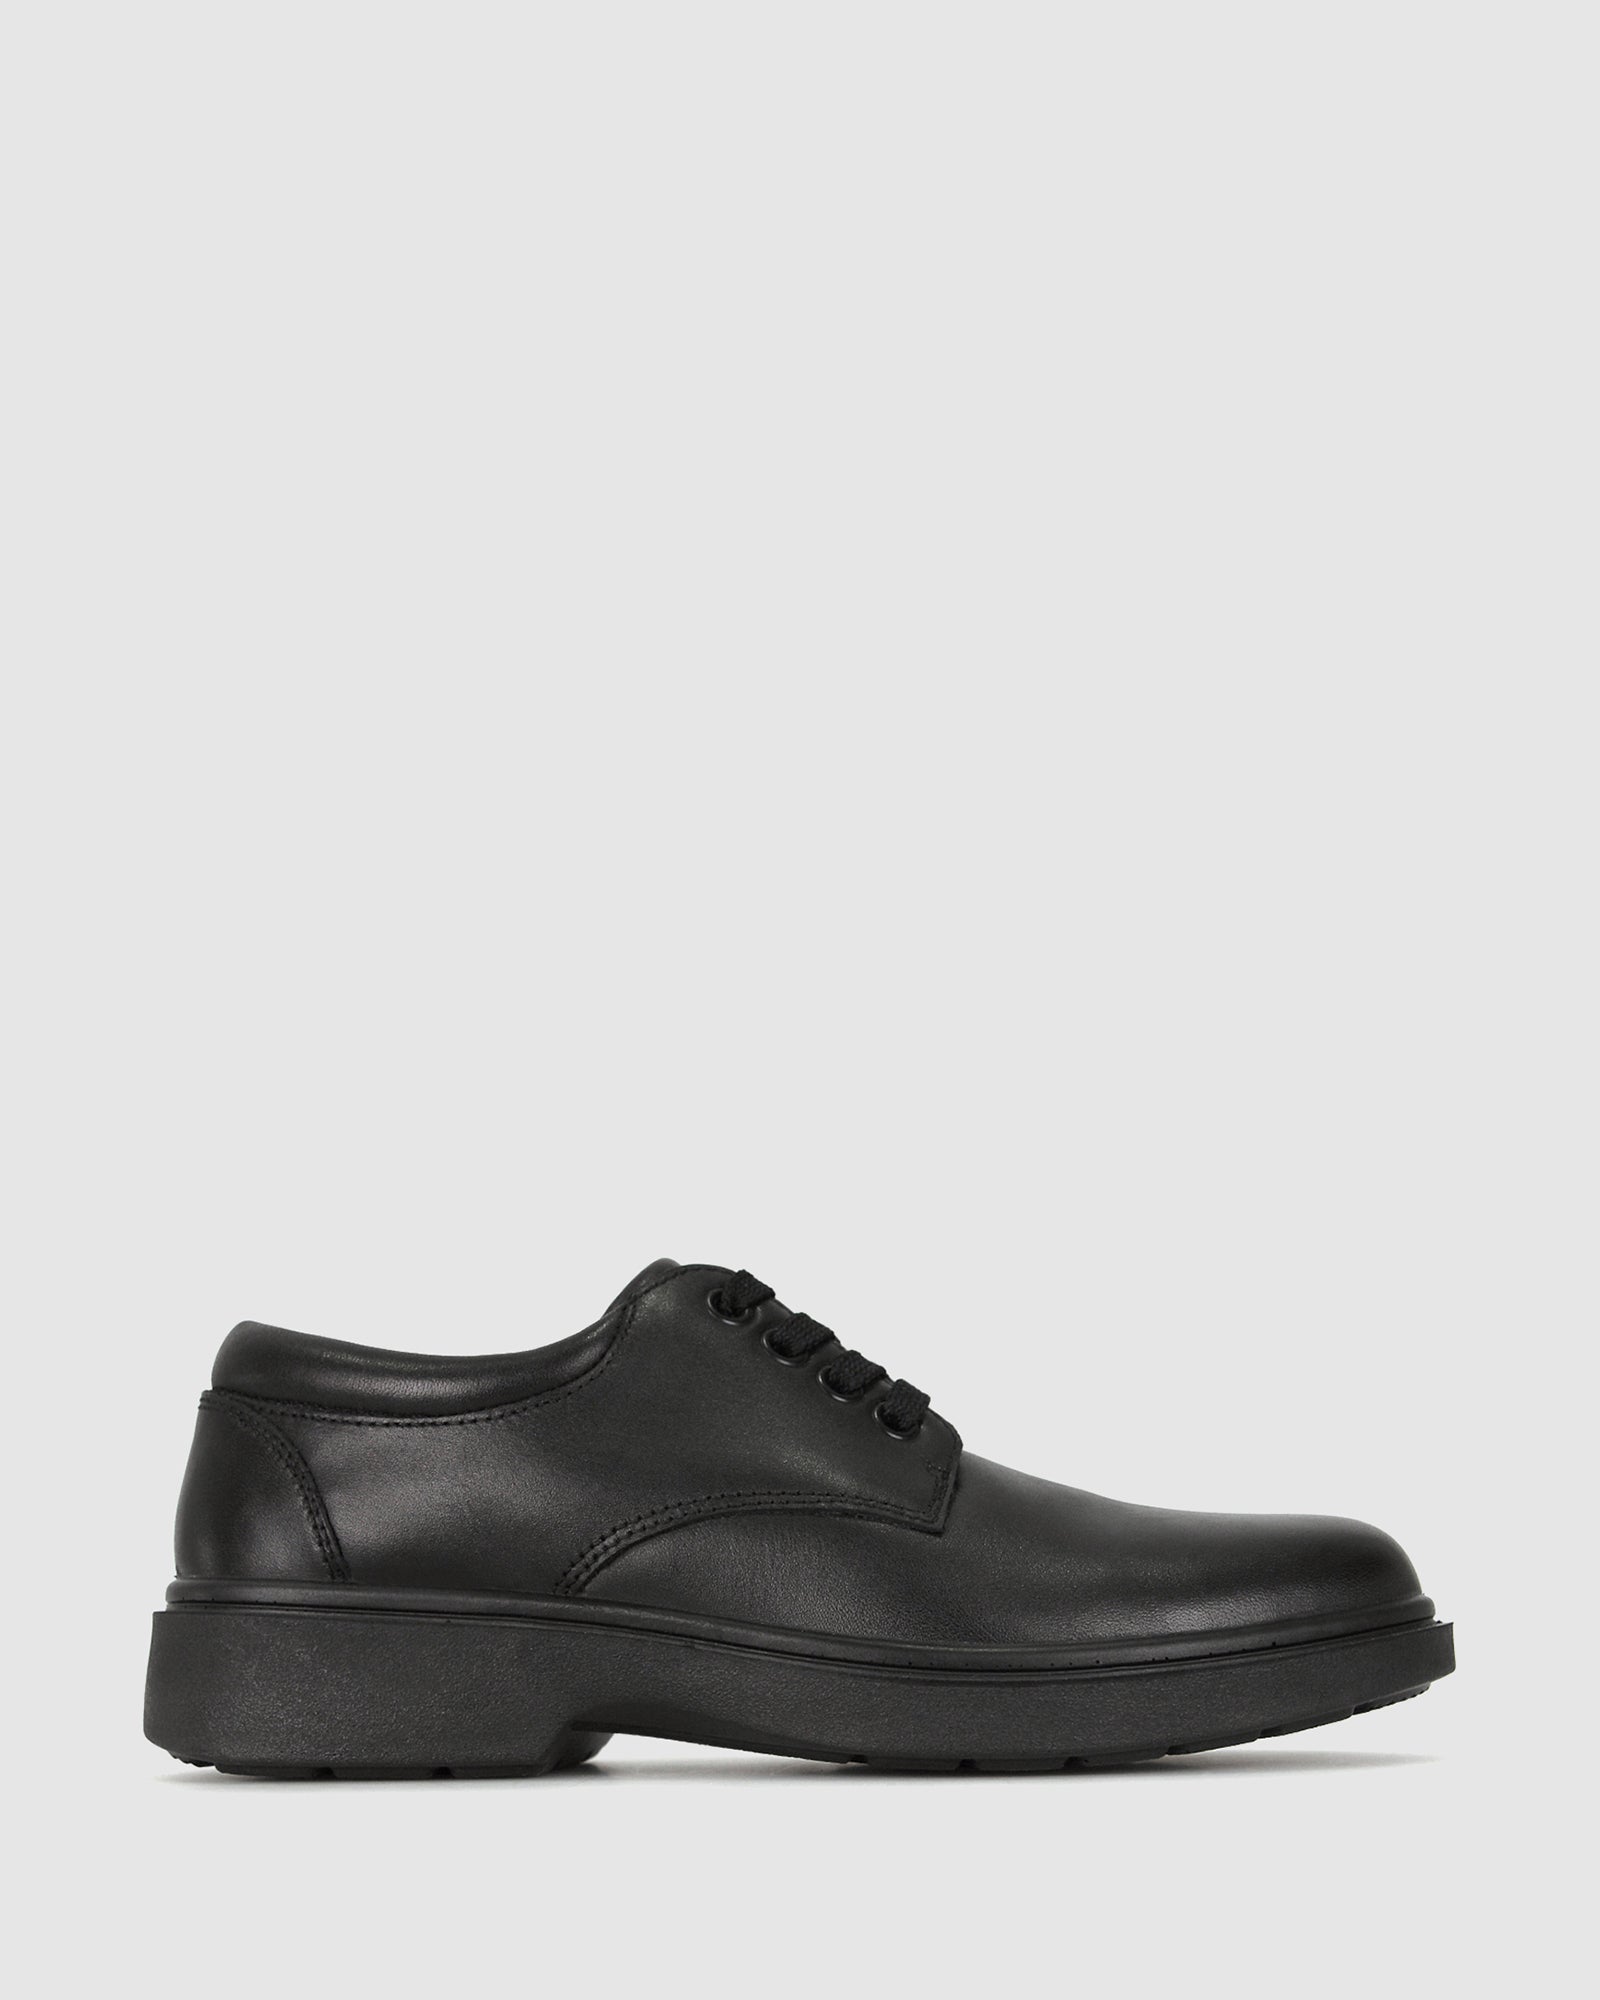 Buy CREW F/G Senior Leather School Shoes by Airflex online - Betts